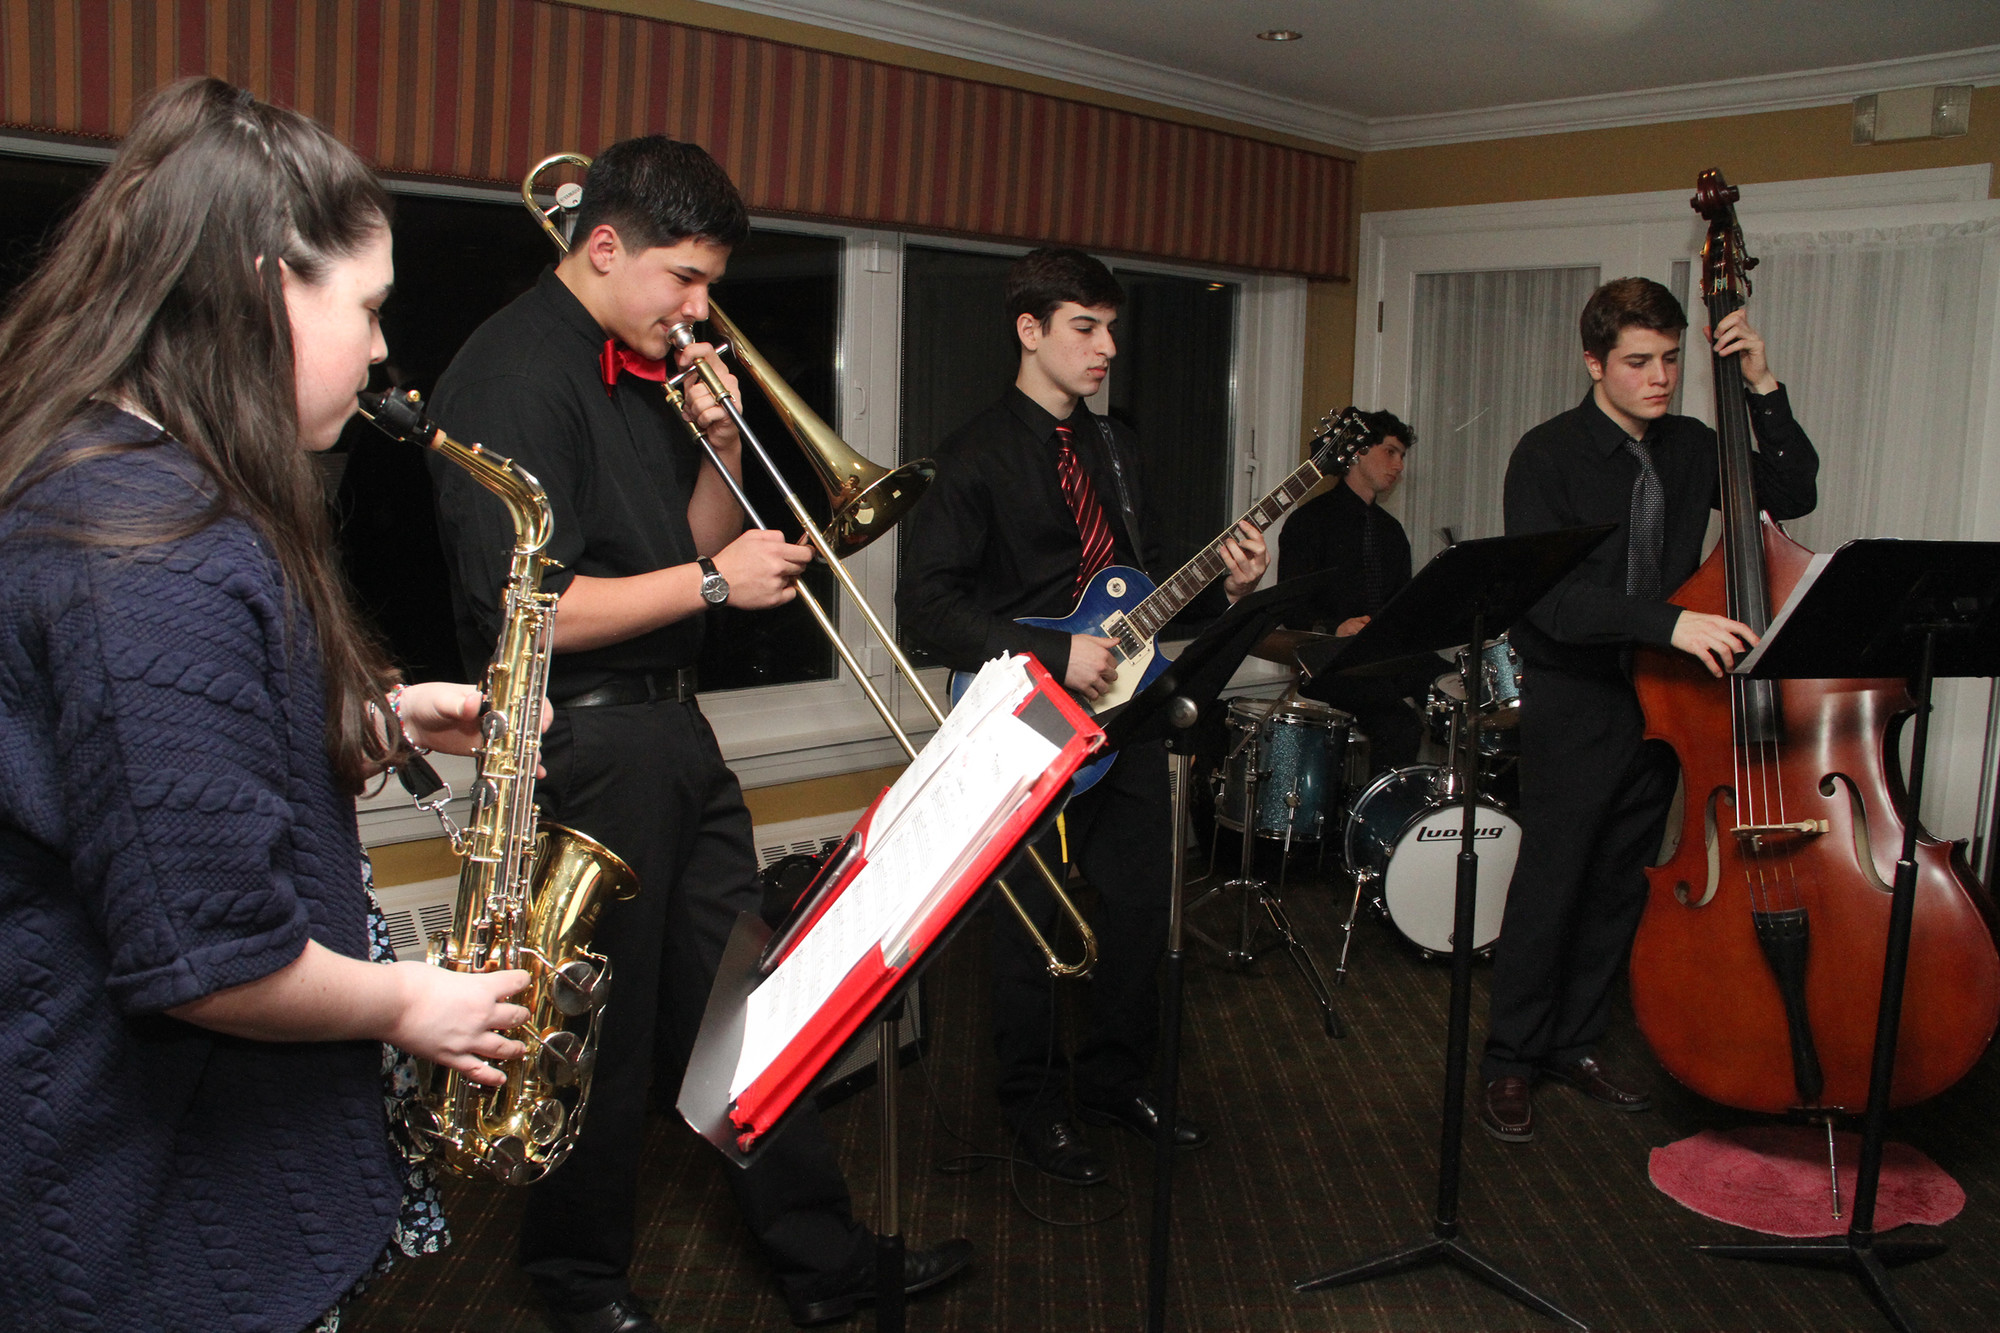 Musicians from the SSHS Music Honor Society performed for the gala’s guests.